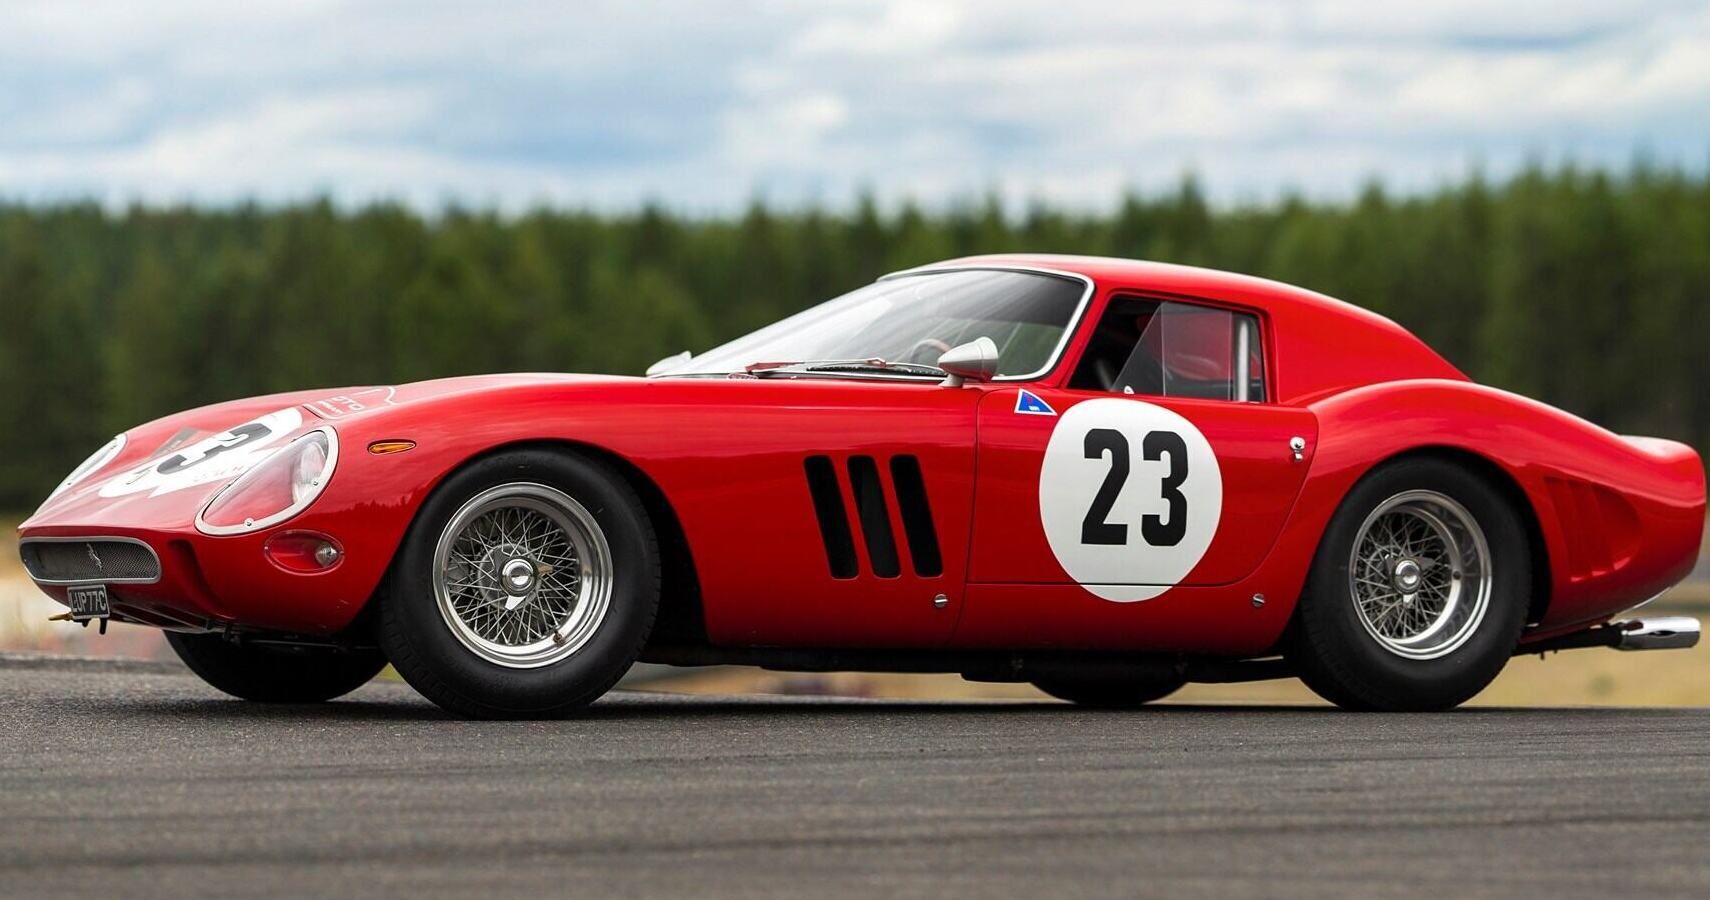 A red 1962 Ferrari 250 GTO parked